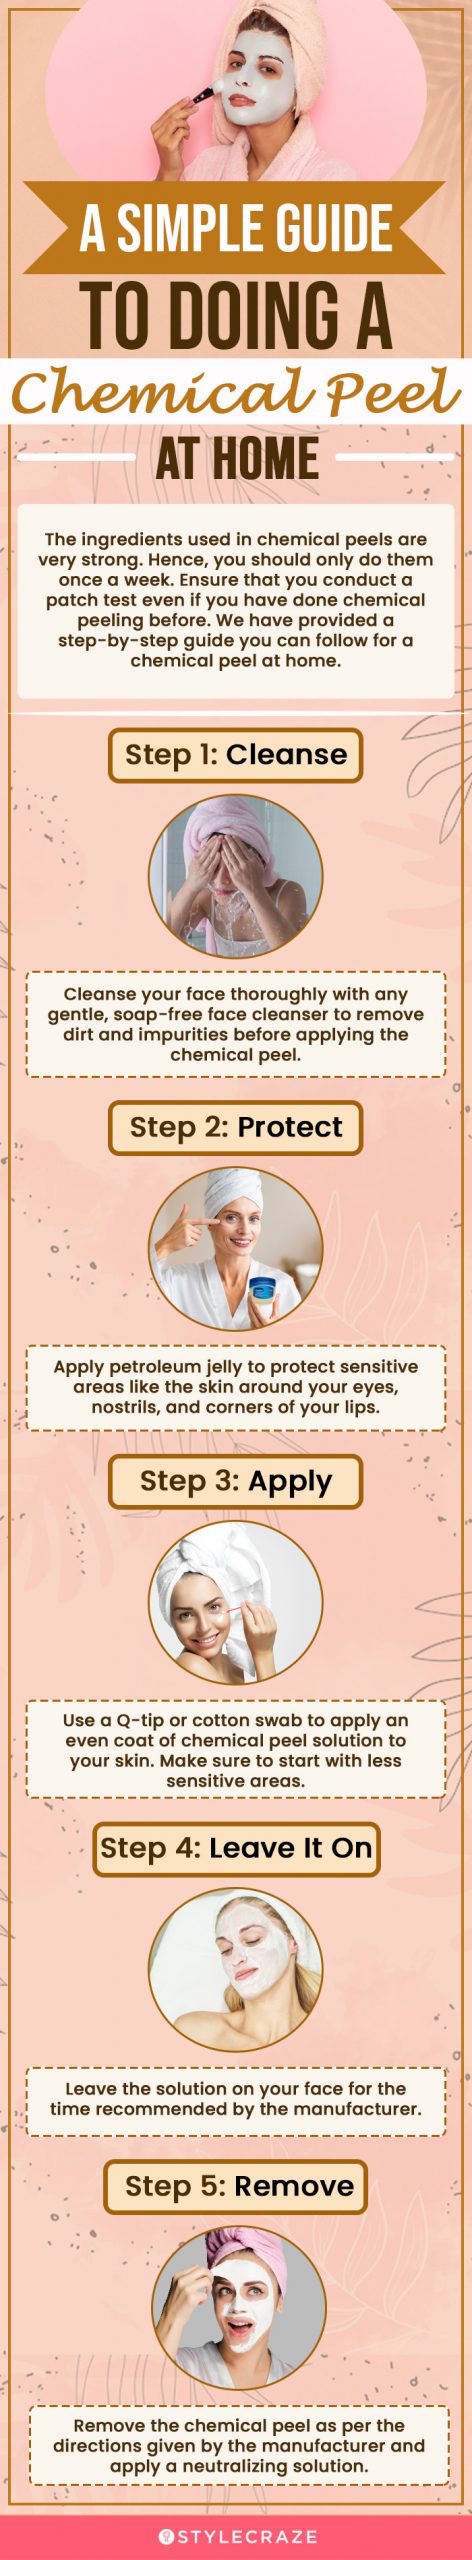 a simple guide to doing a chemical peel at home [infographic]